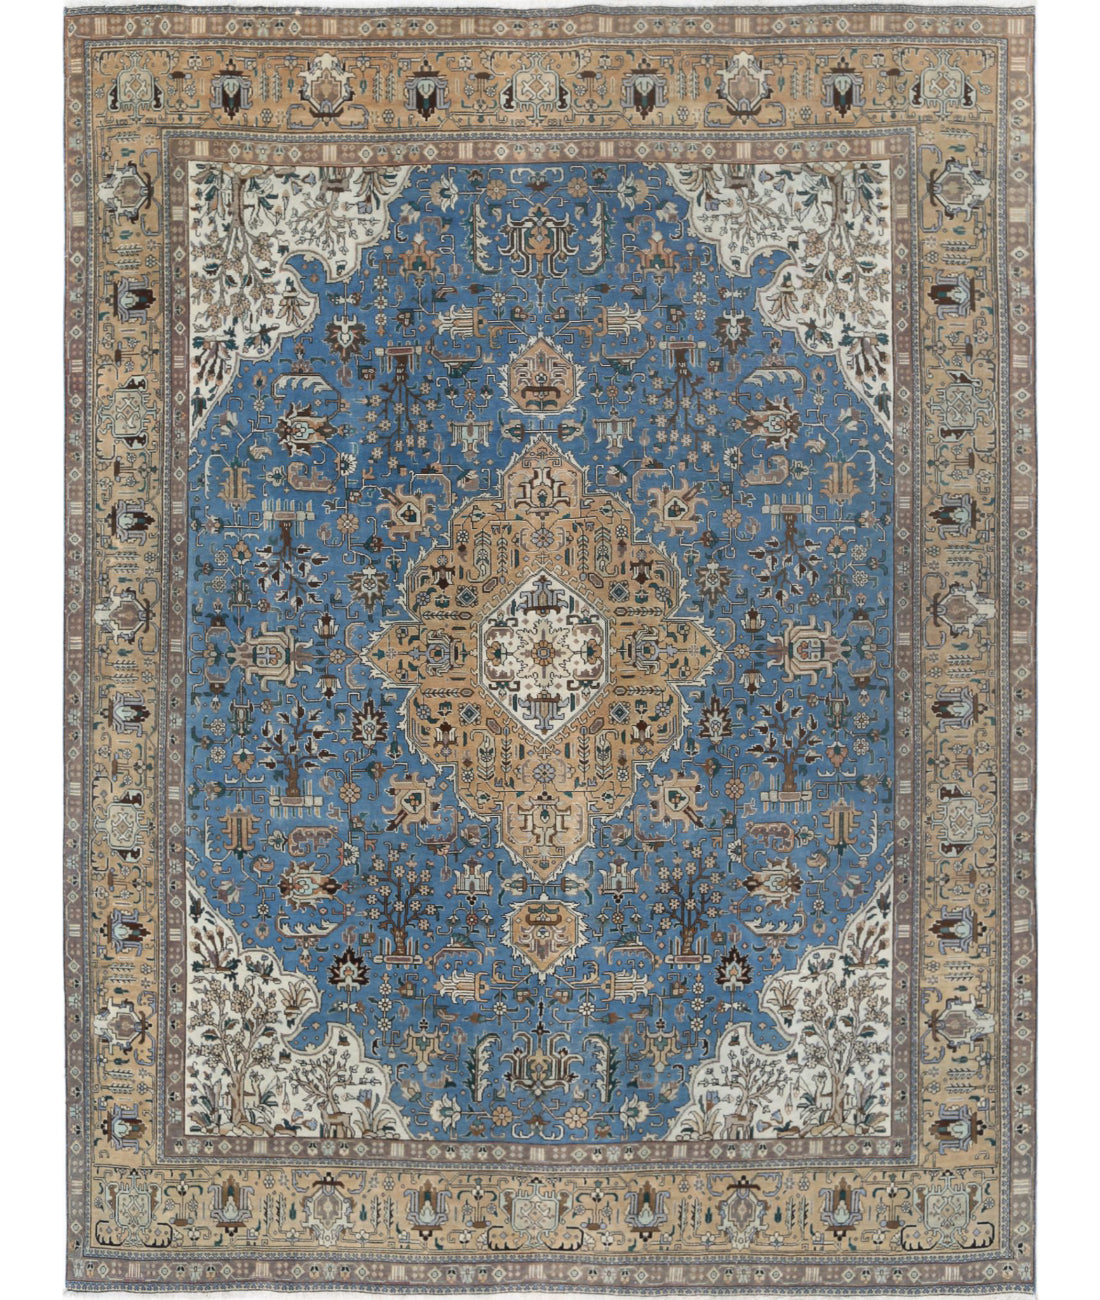 Hand Knotted Antique Persian Tabriz Wool Rug - 9'8'' x 12'1'' 9'8'' x 12'1'' (290 X 363) / Blue / Beige